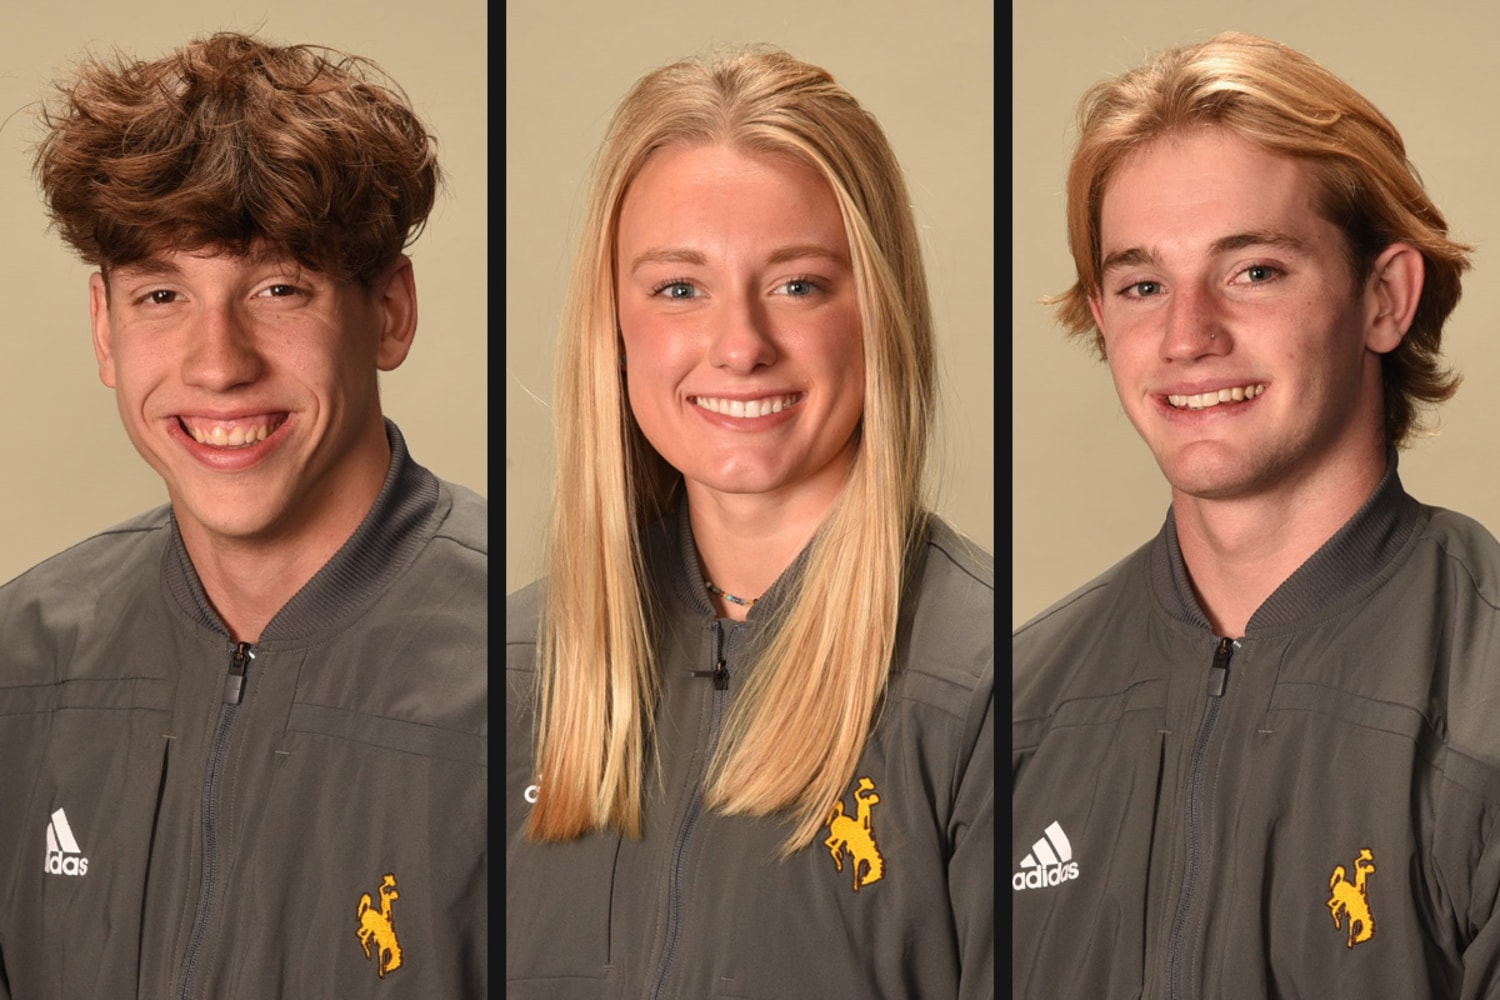 Three University of Wyoming swimmers killed and two injured in highway crash – NBC News